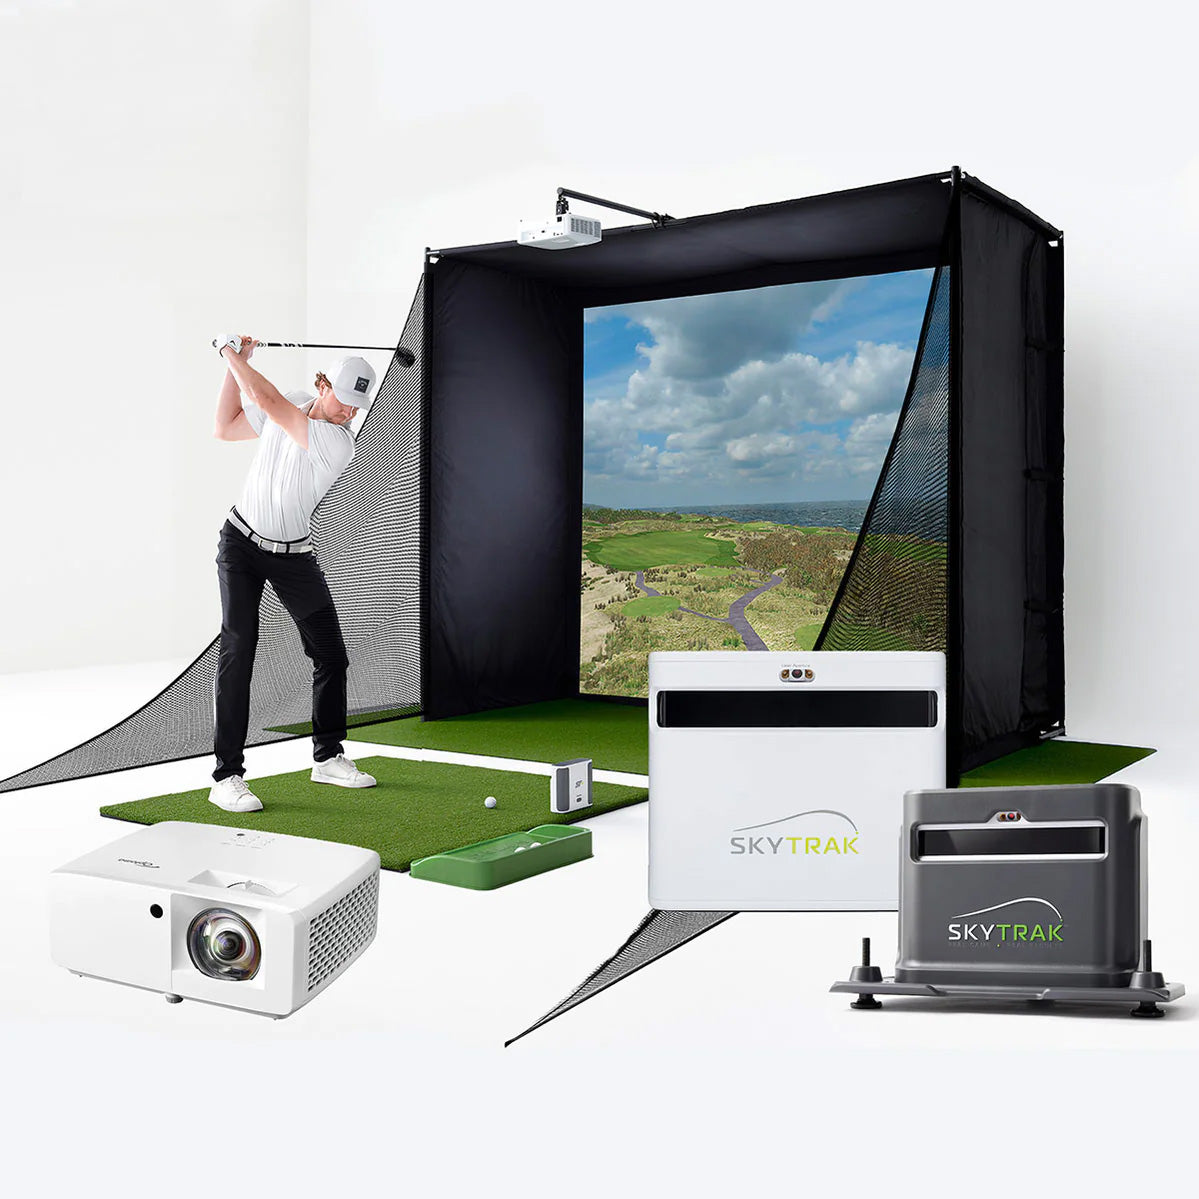 The SkyTrak+ pictured with the PlayBetter SimStudio home golf simulator and projector and protective case